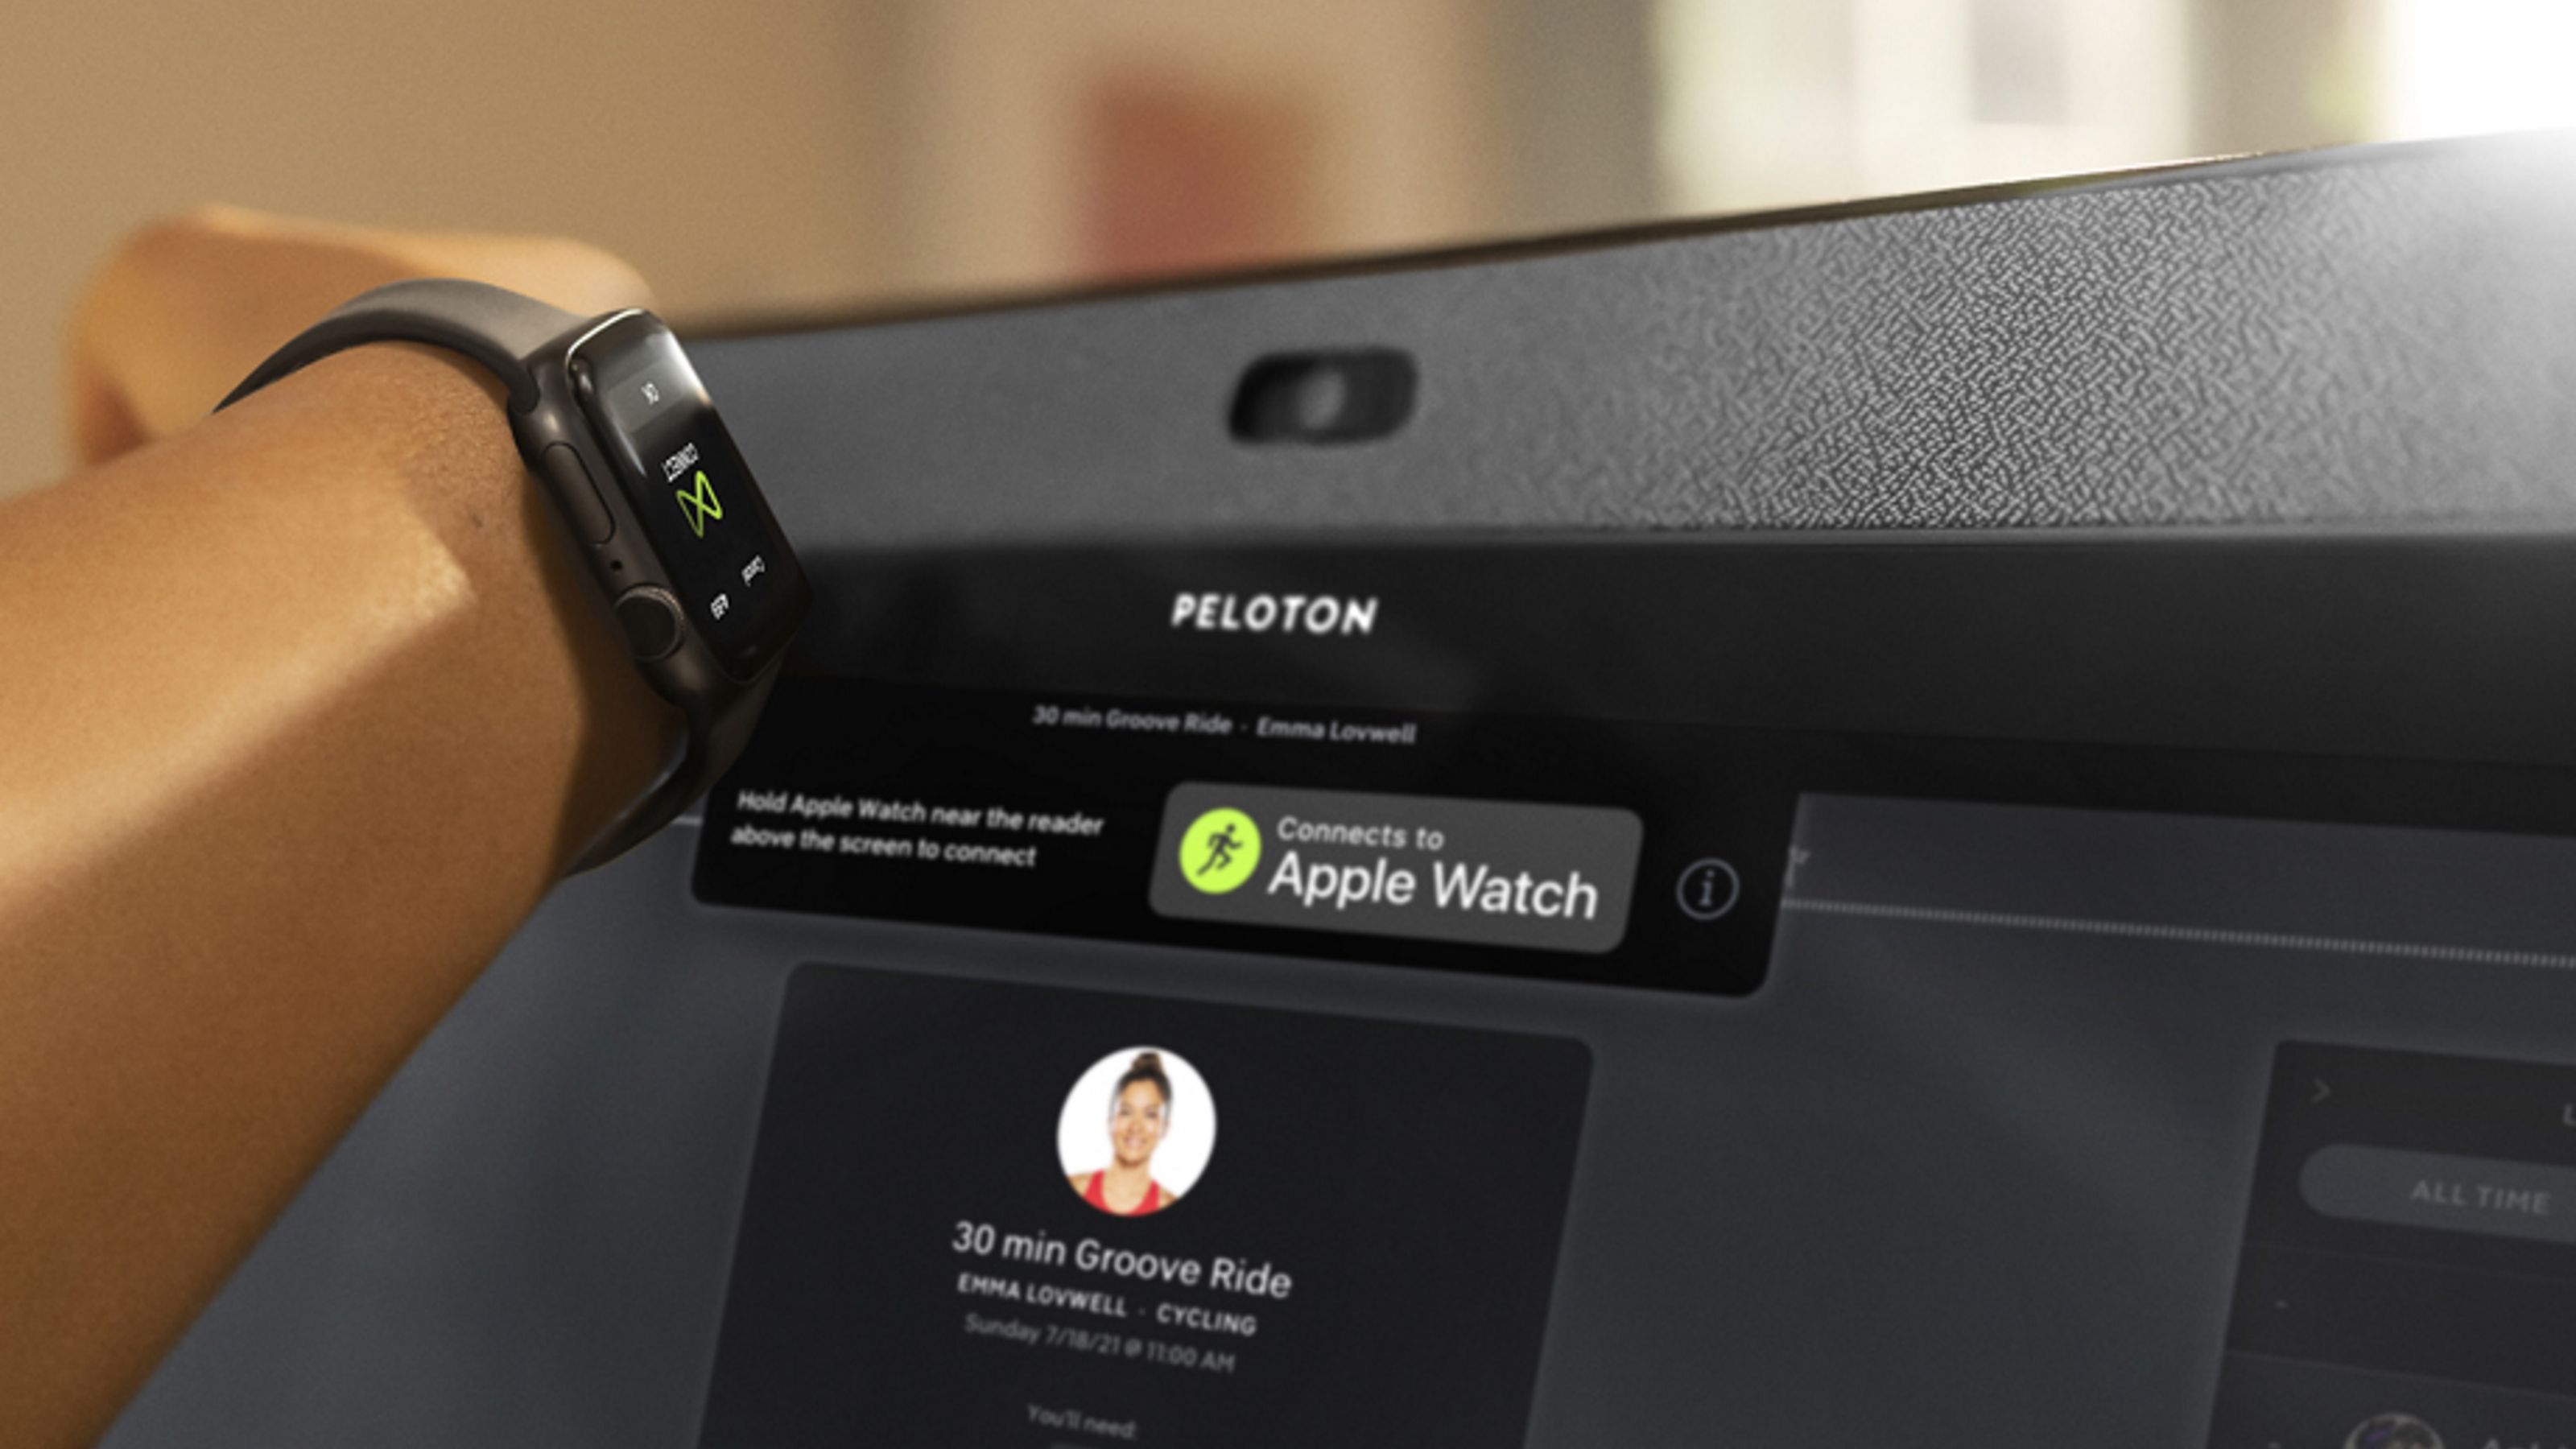 Connecting your Apple Watch with your Peloton can…